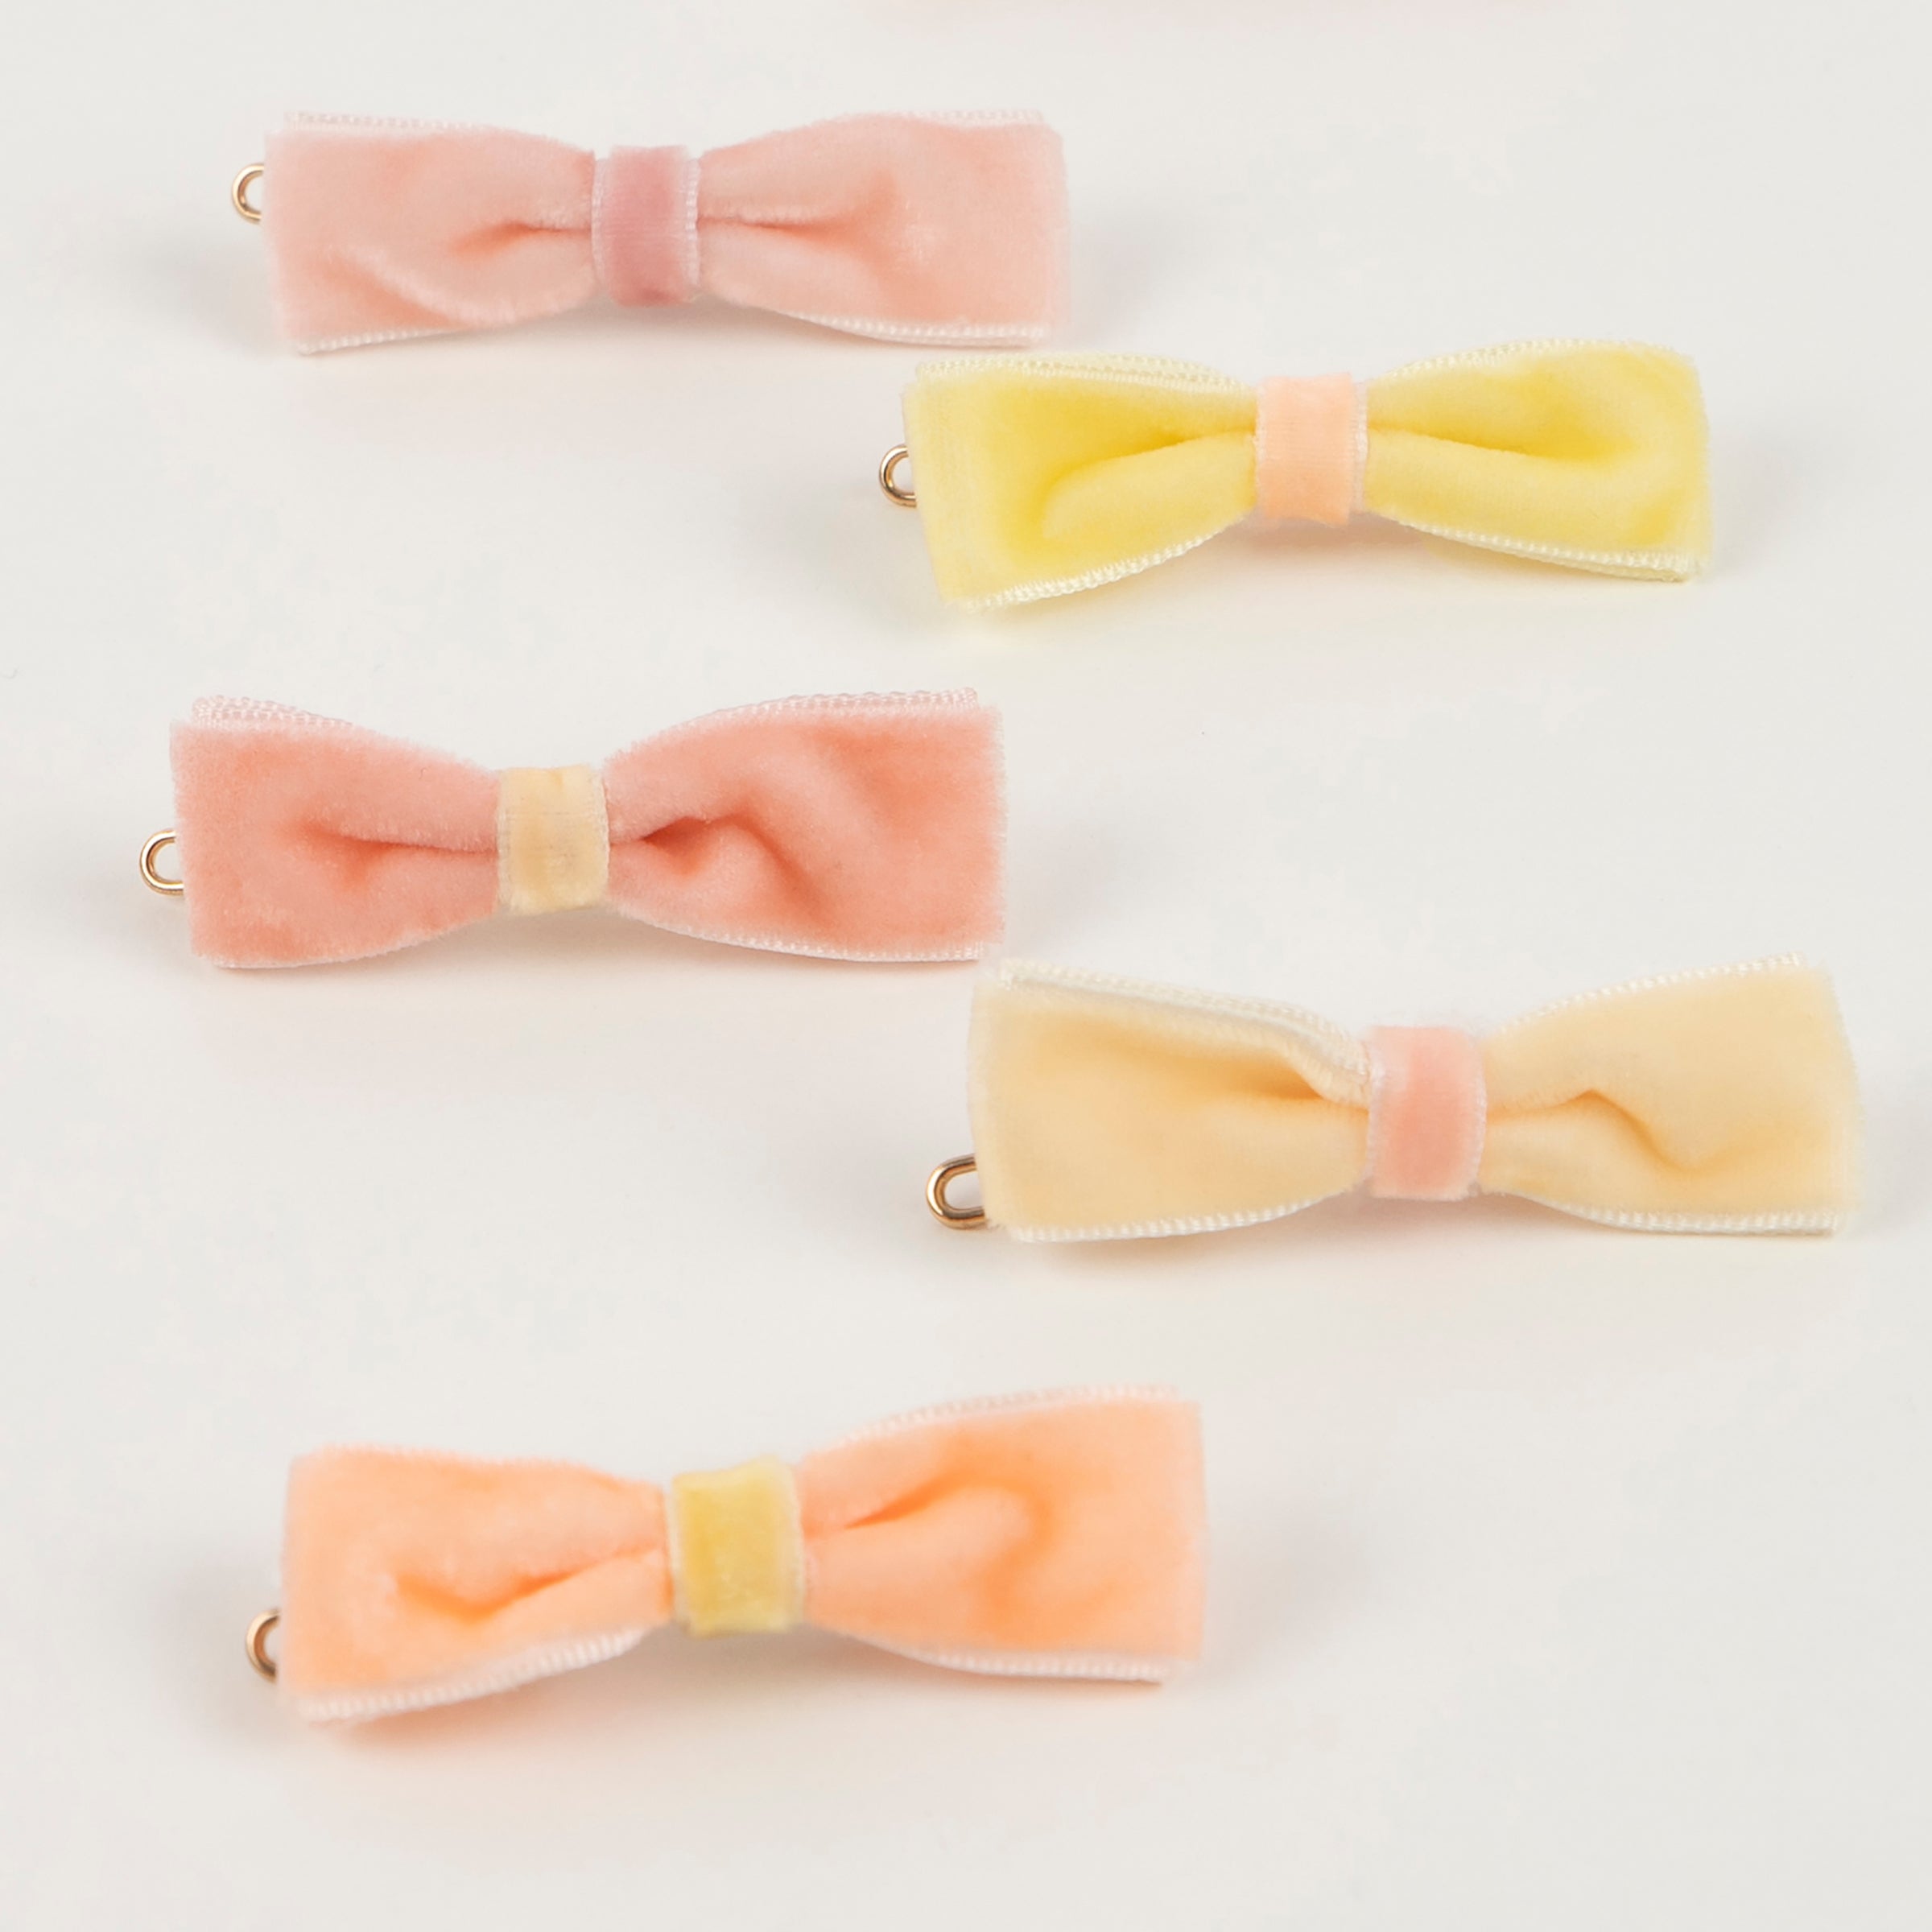 Our mini bows for hair are crafted from velvet ribbons in pastel shades.